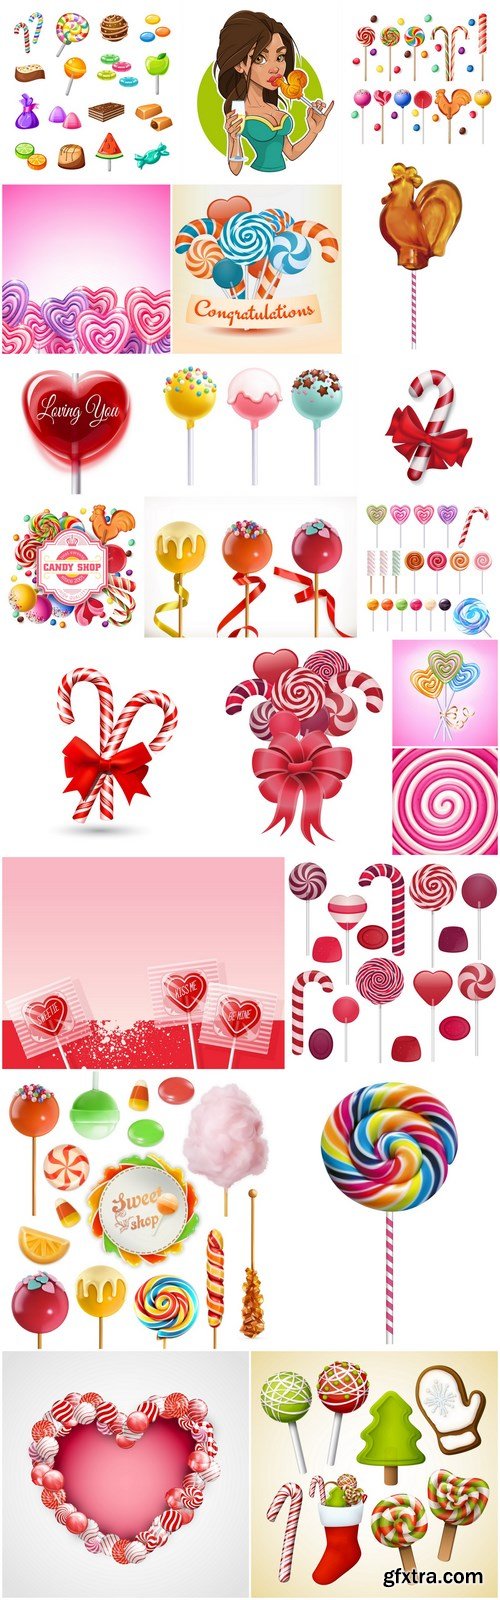 Colorful Lollipop Candy - 22 Vector